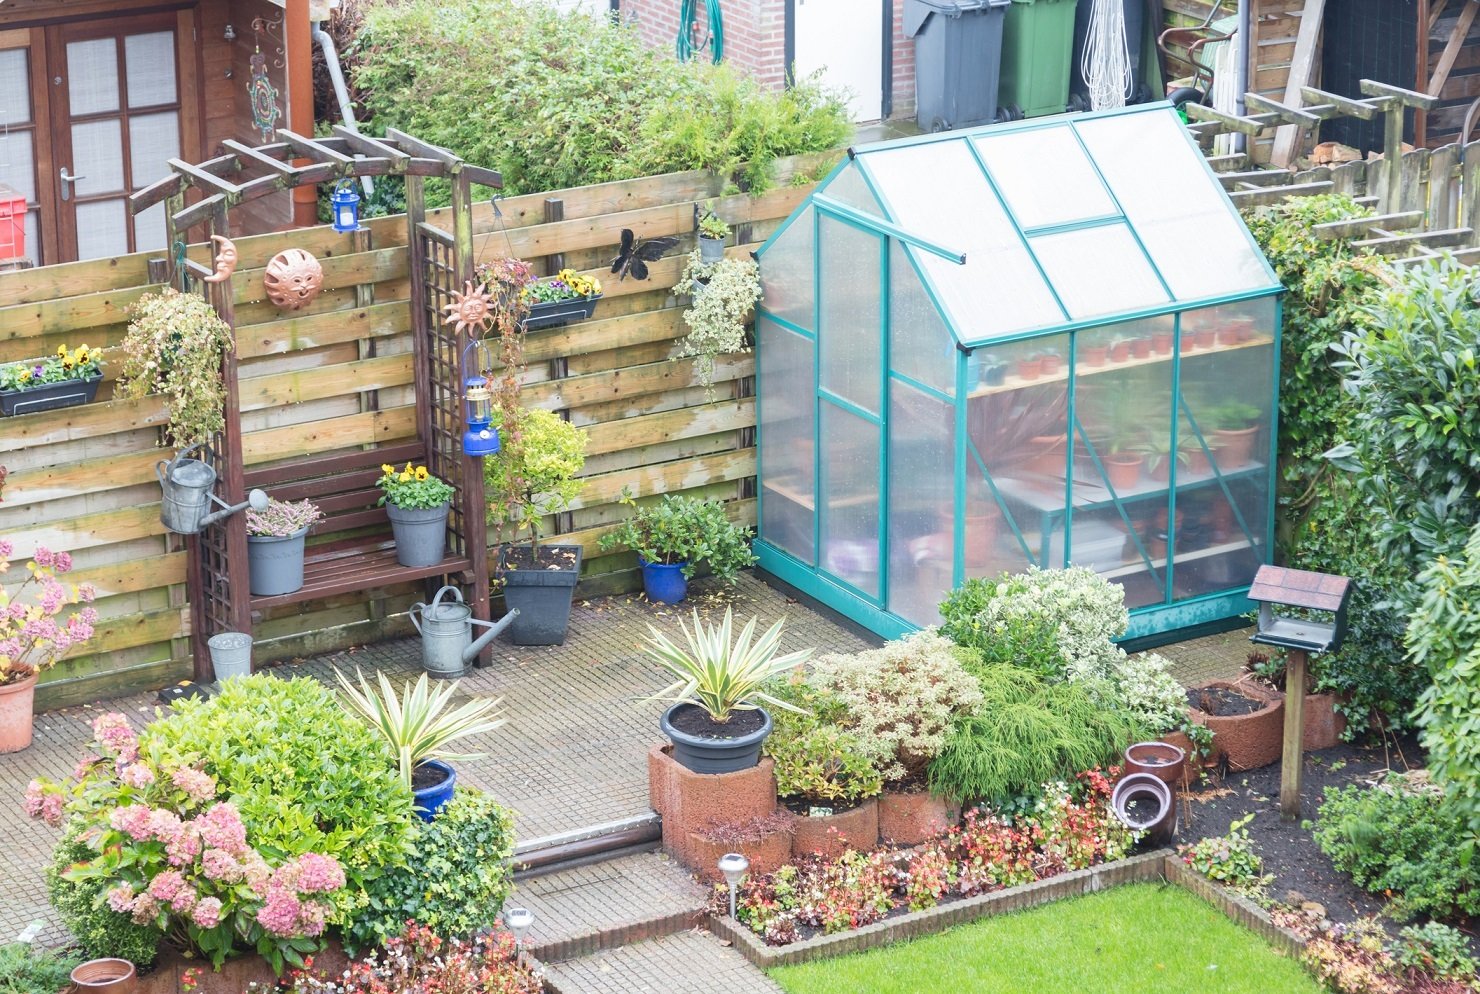 Small greenhouse in a garden